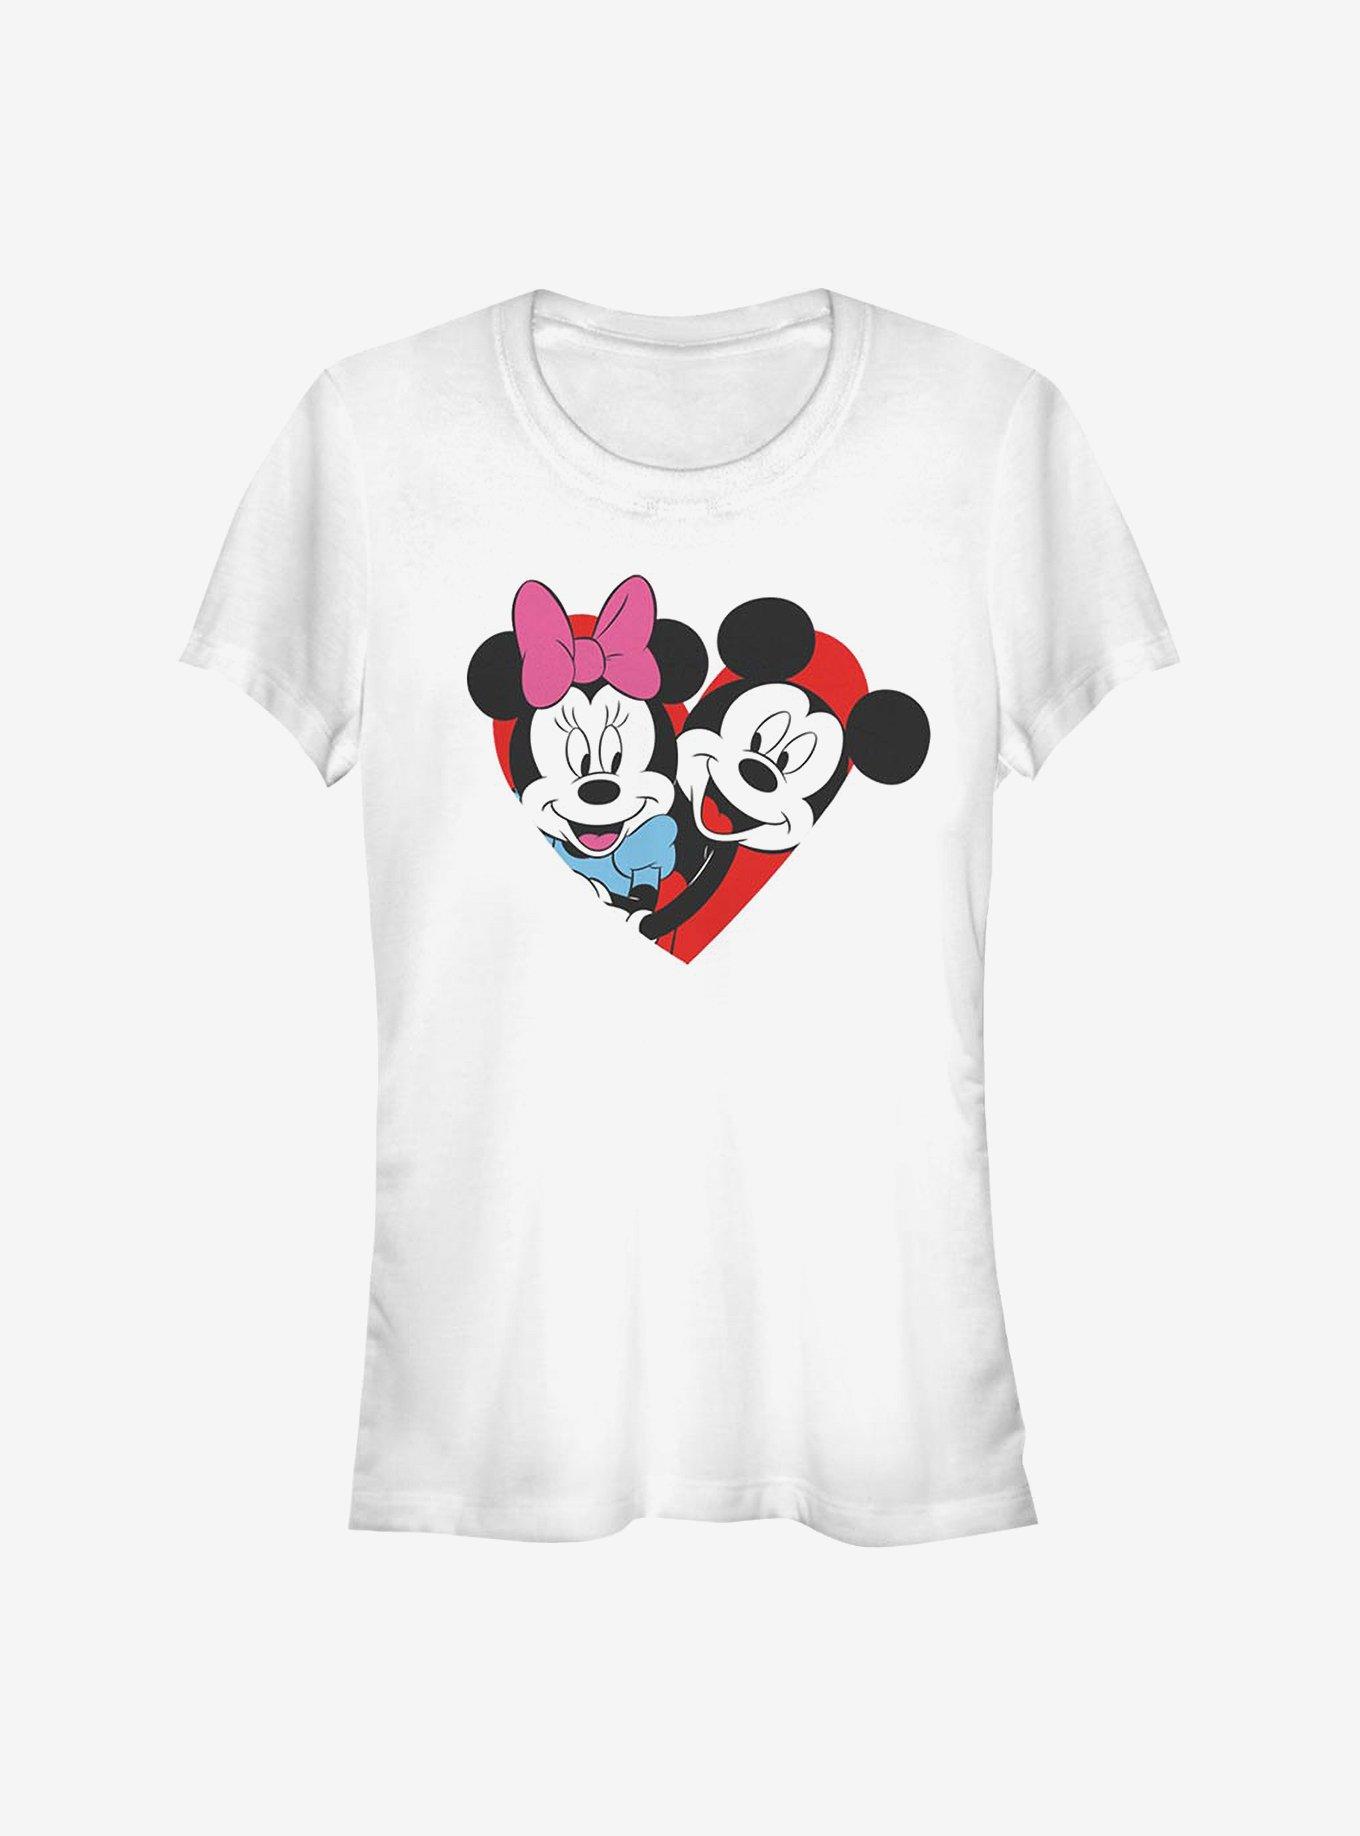 Disney Mickey Mouse & Minnie Mouse Heart Girls T-Shirt, WHITE, hi-res